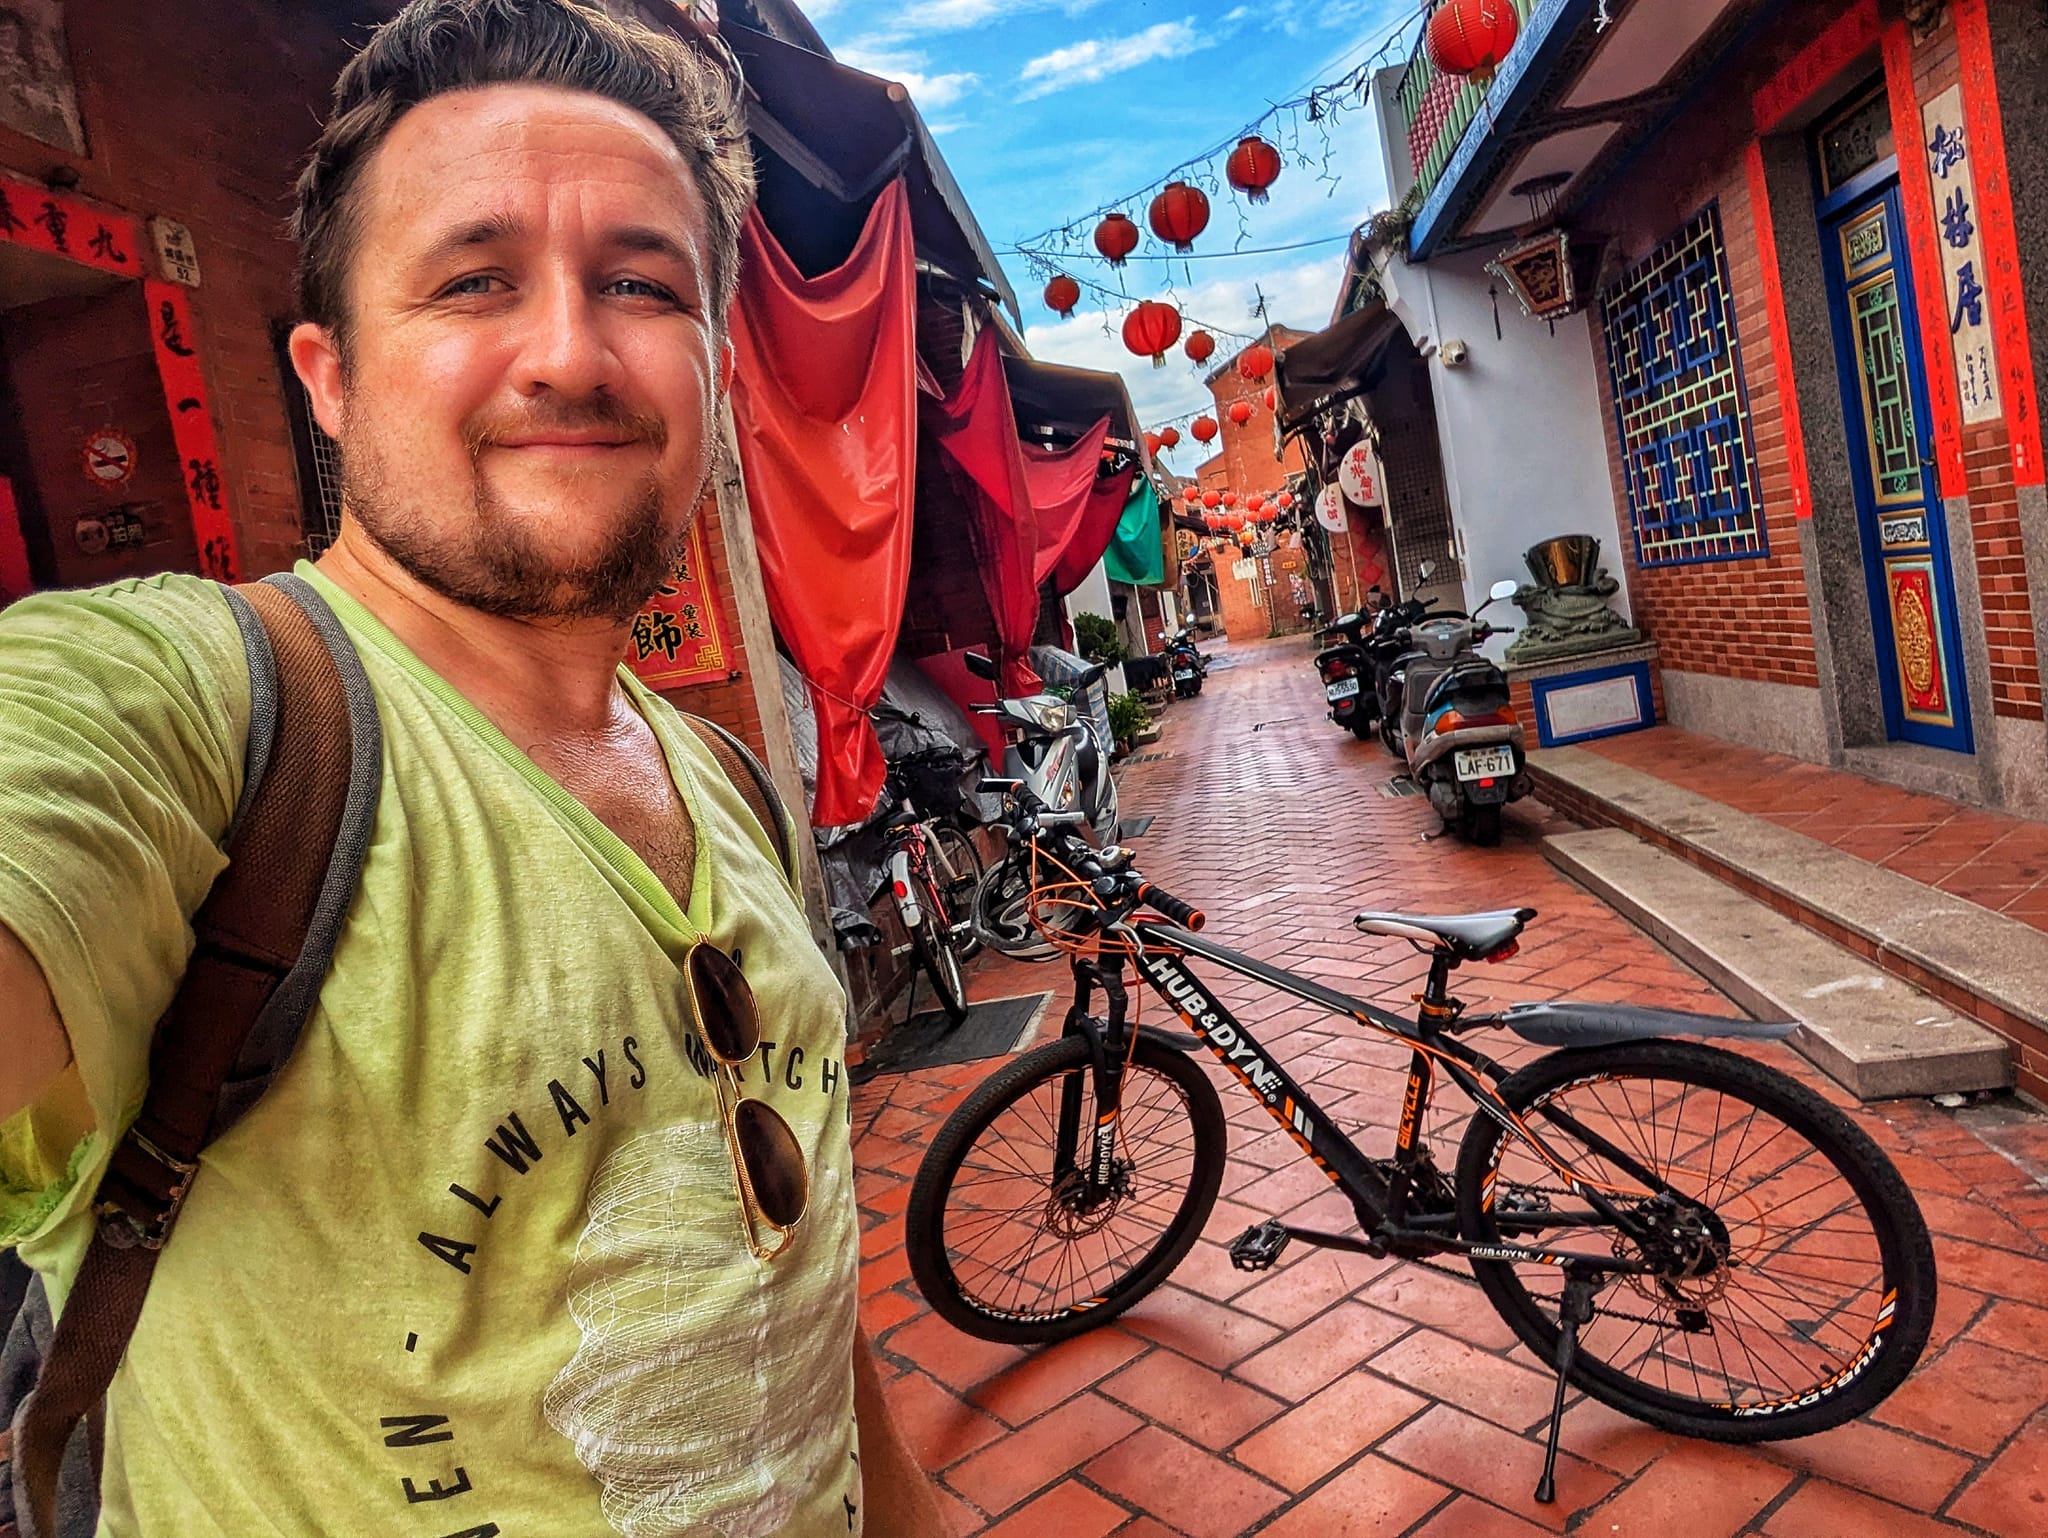 The author wearing a yellow shirt takes a selfie with his bike in the background on an alley.